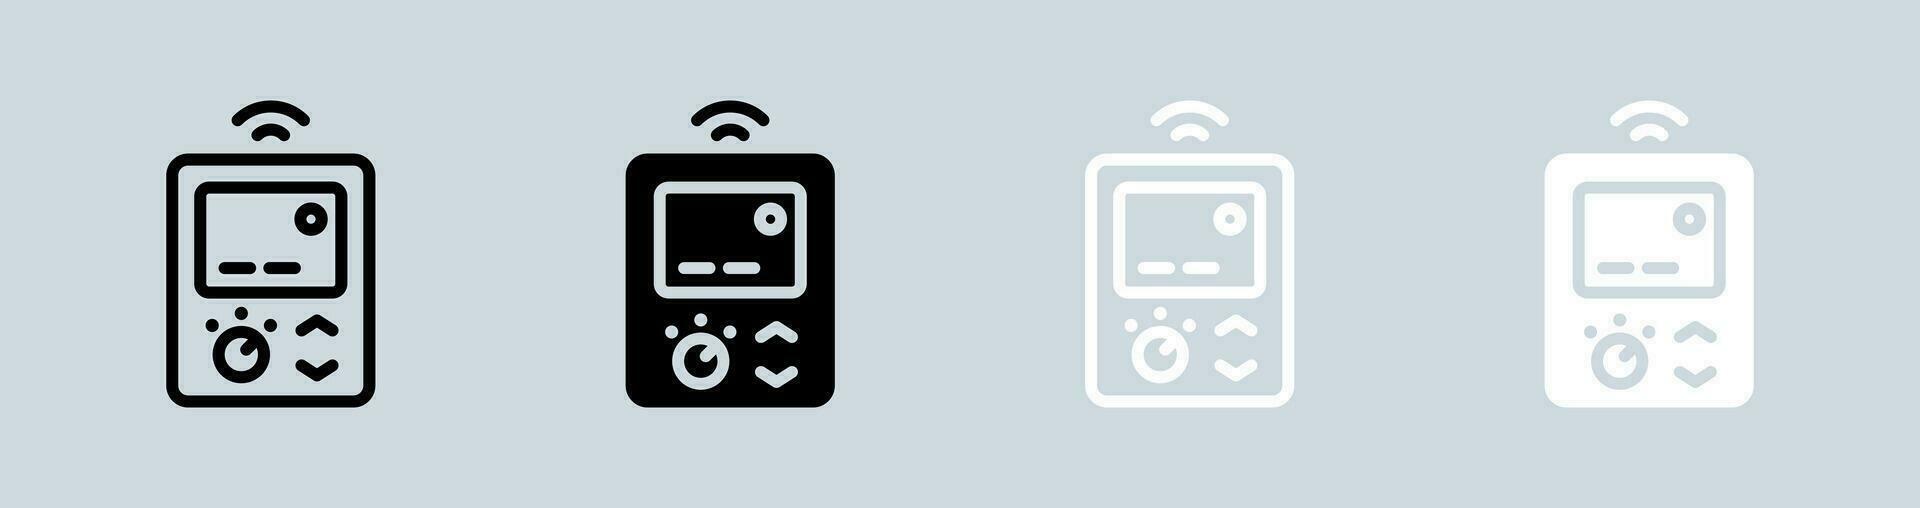 Thermostat icon set in black and white. Temperature technology signs vector illustration.